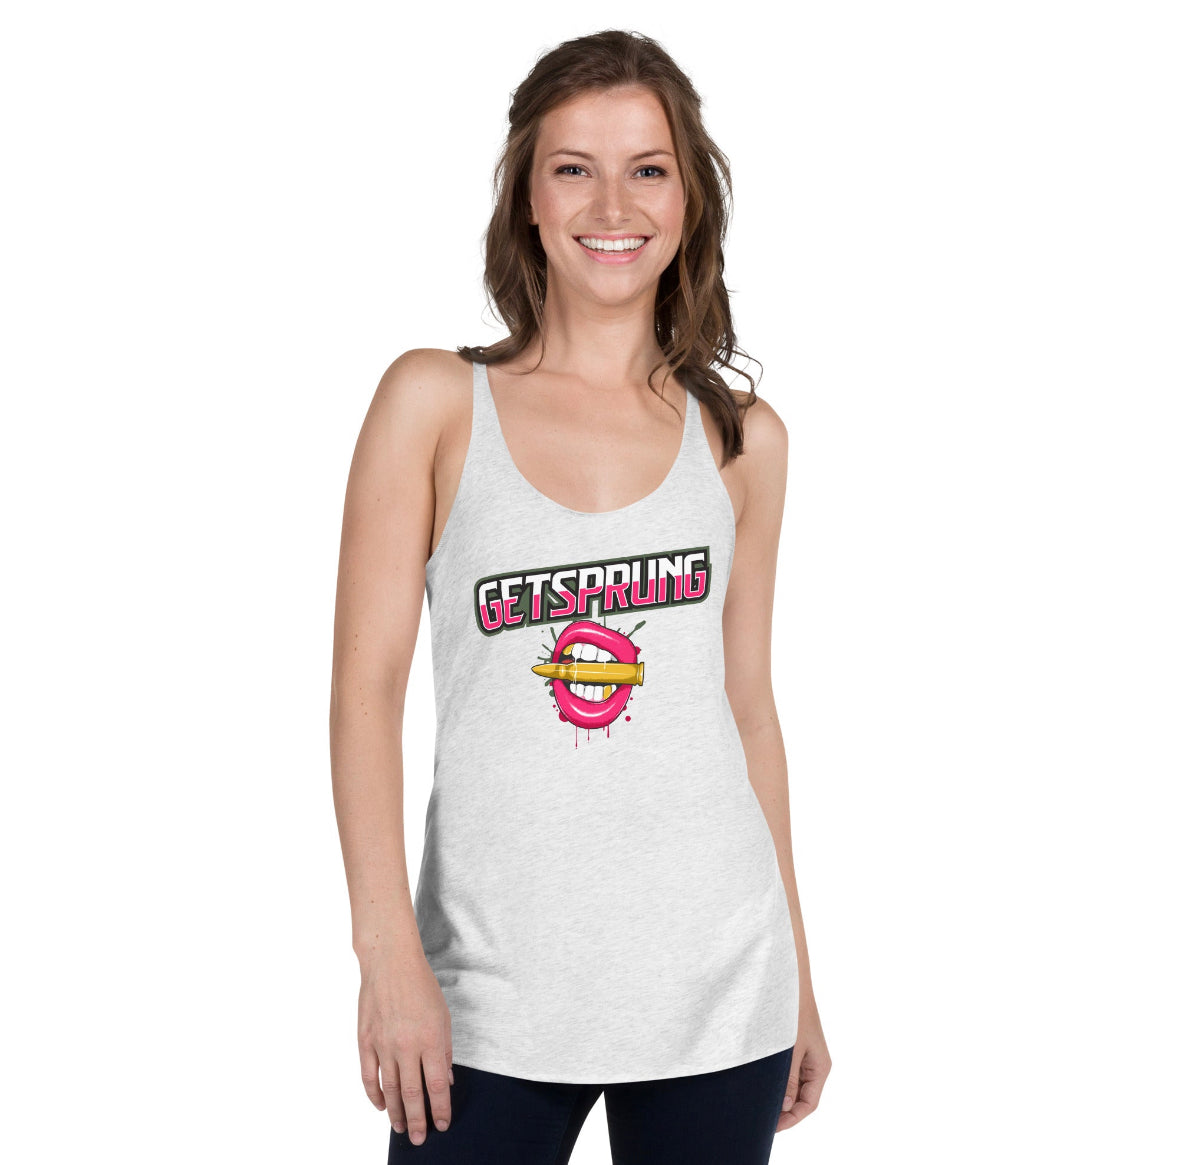 Authentic "Get Sprung" Women's Racerback Tank with Bullet lips with golden bullet v2 - AR TakeDown Tool 